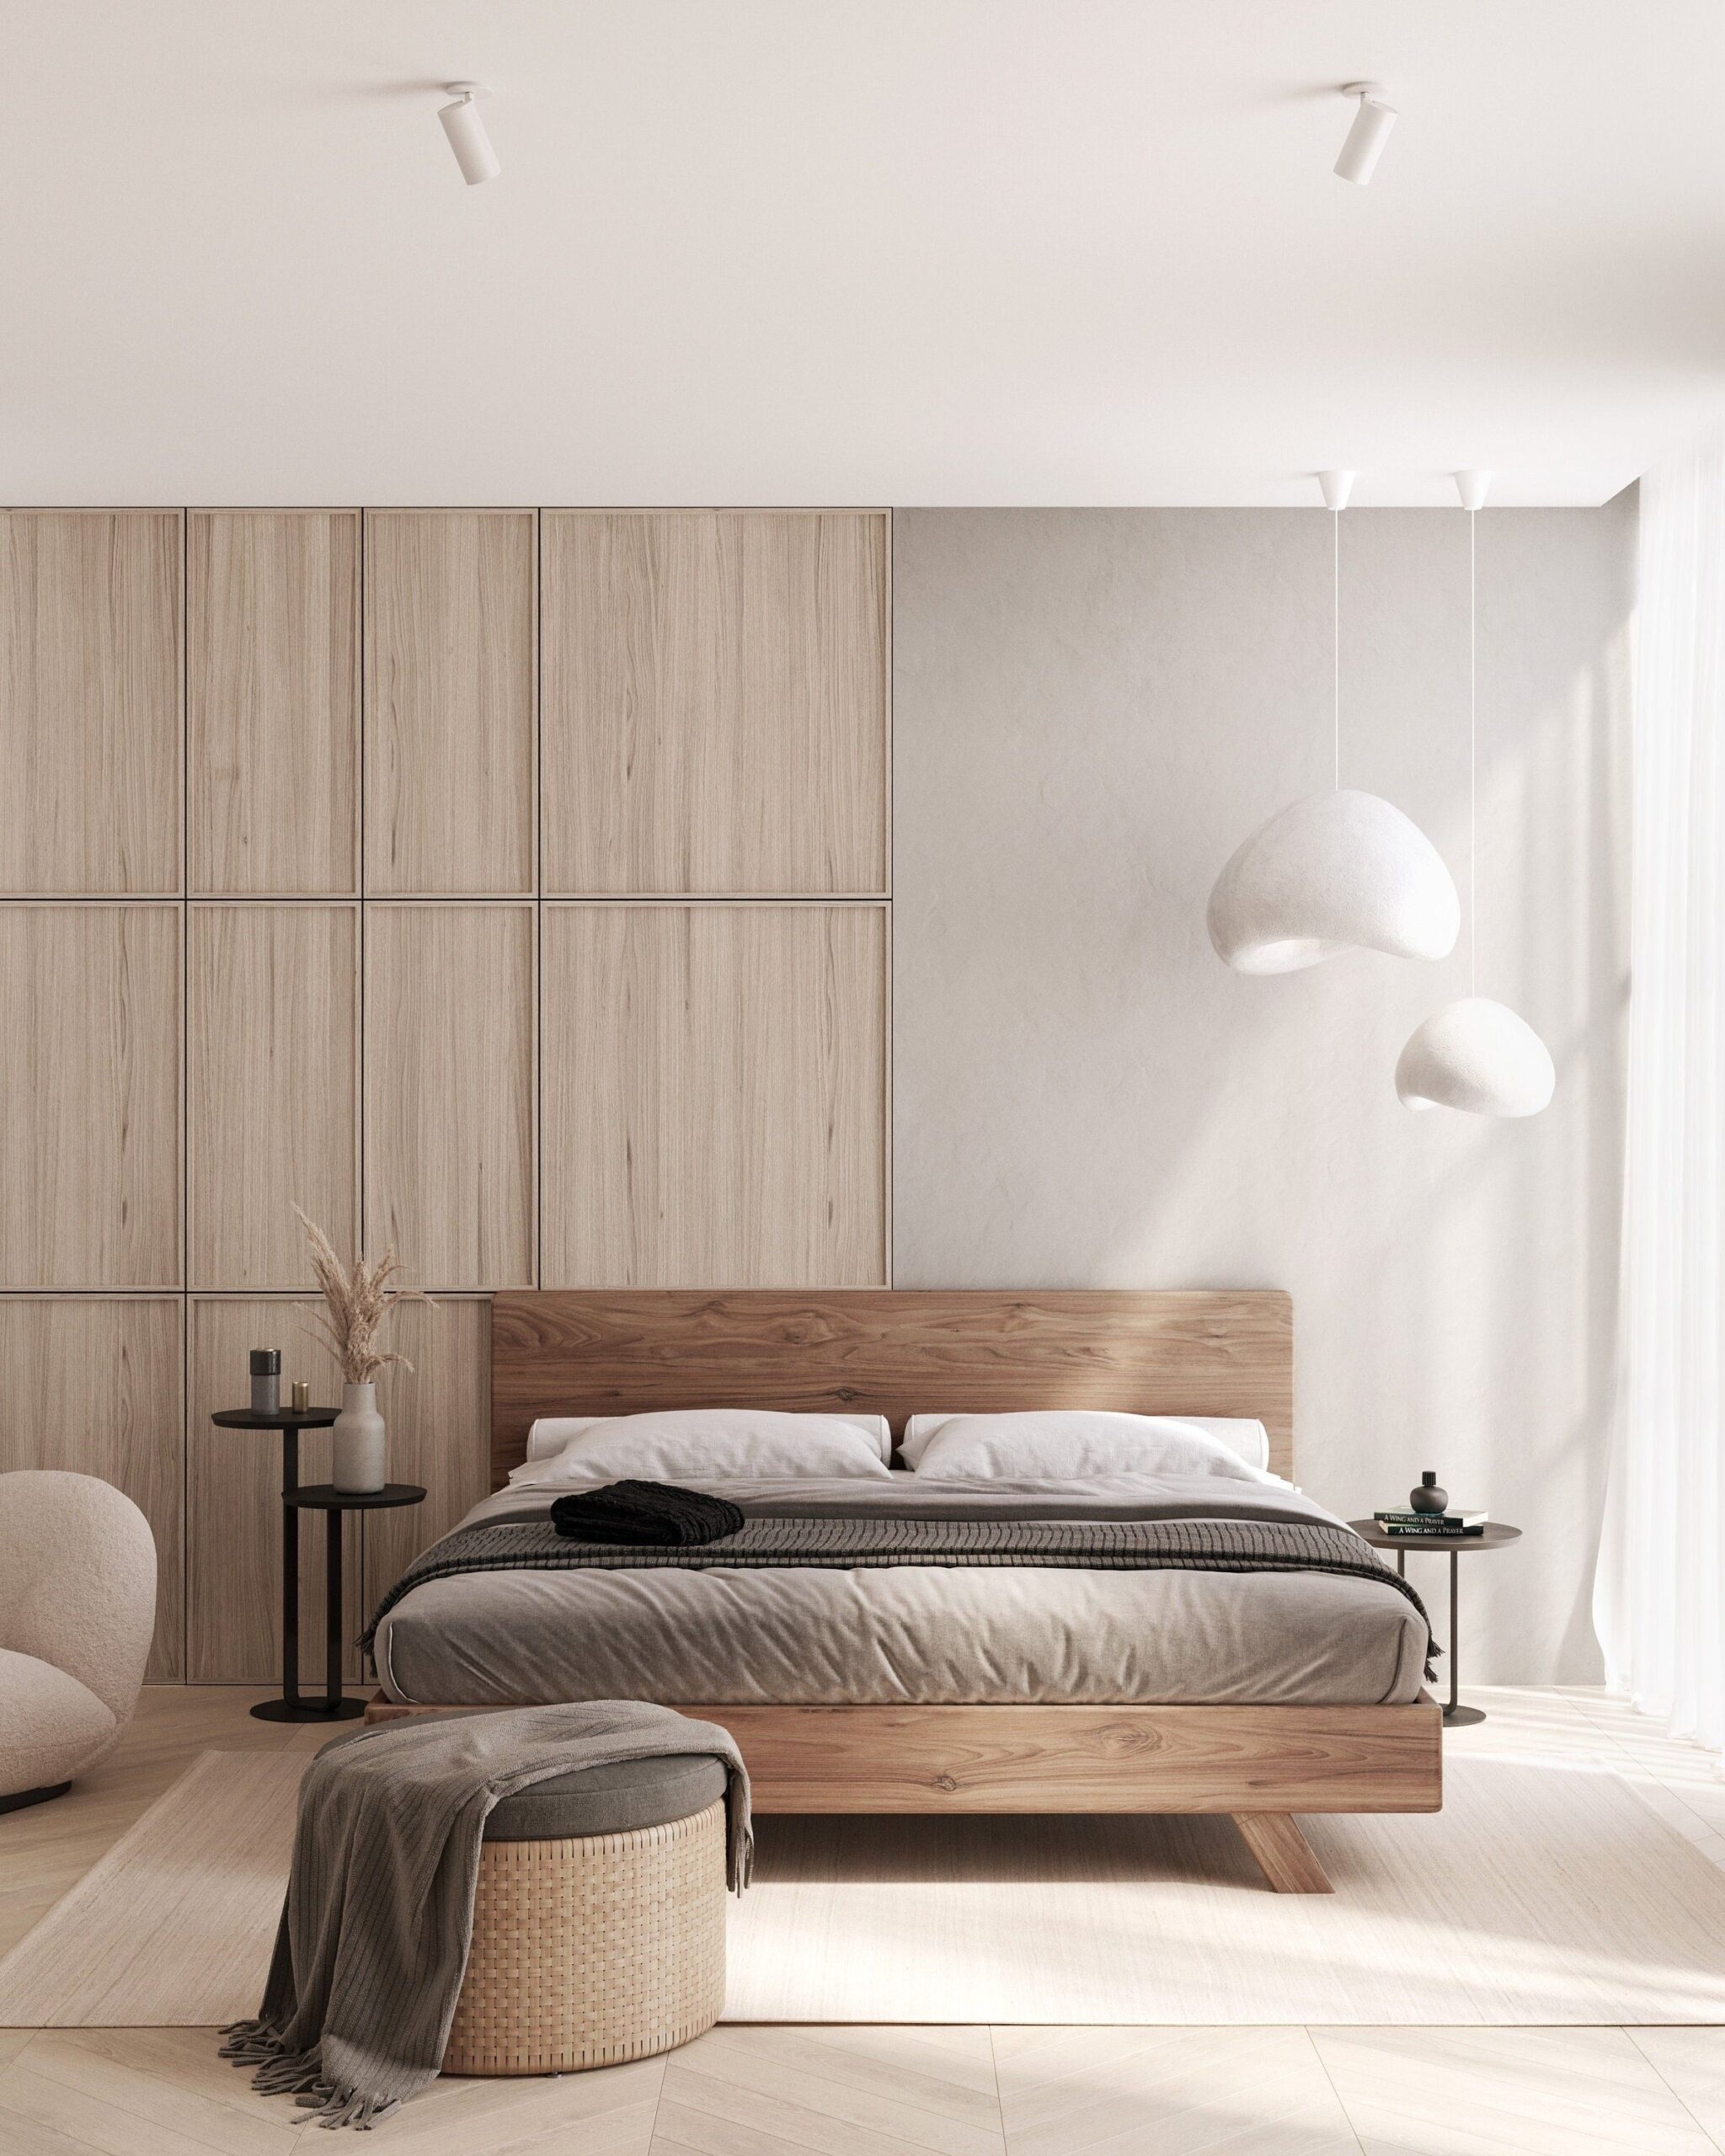 Tips for selecting wooden beds for your
home: